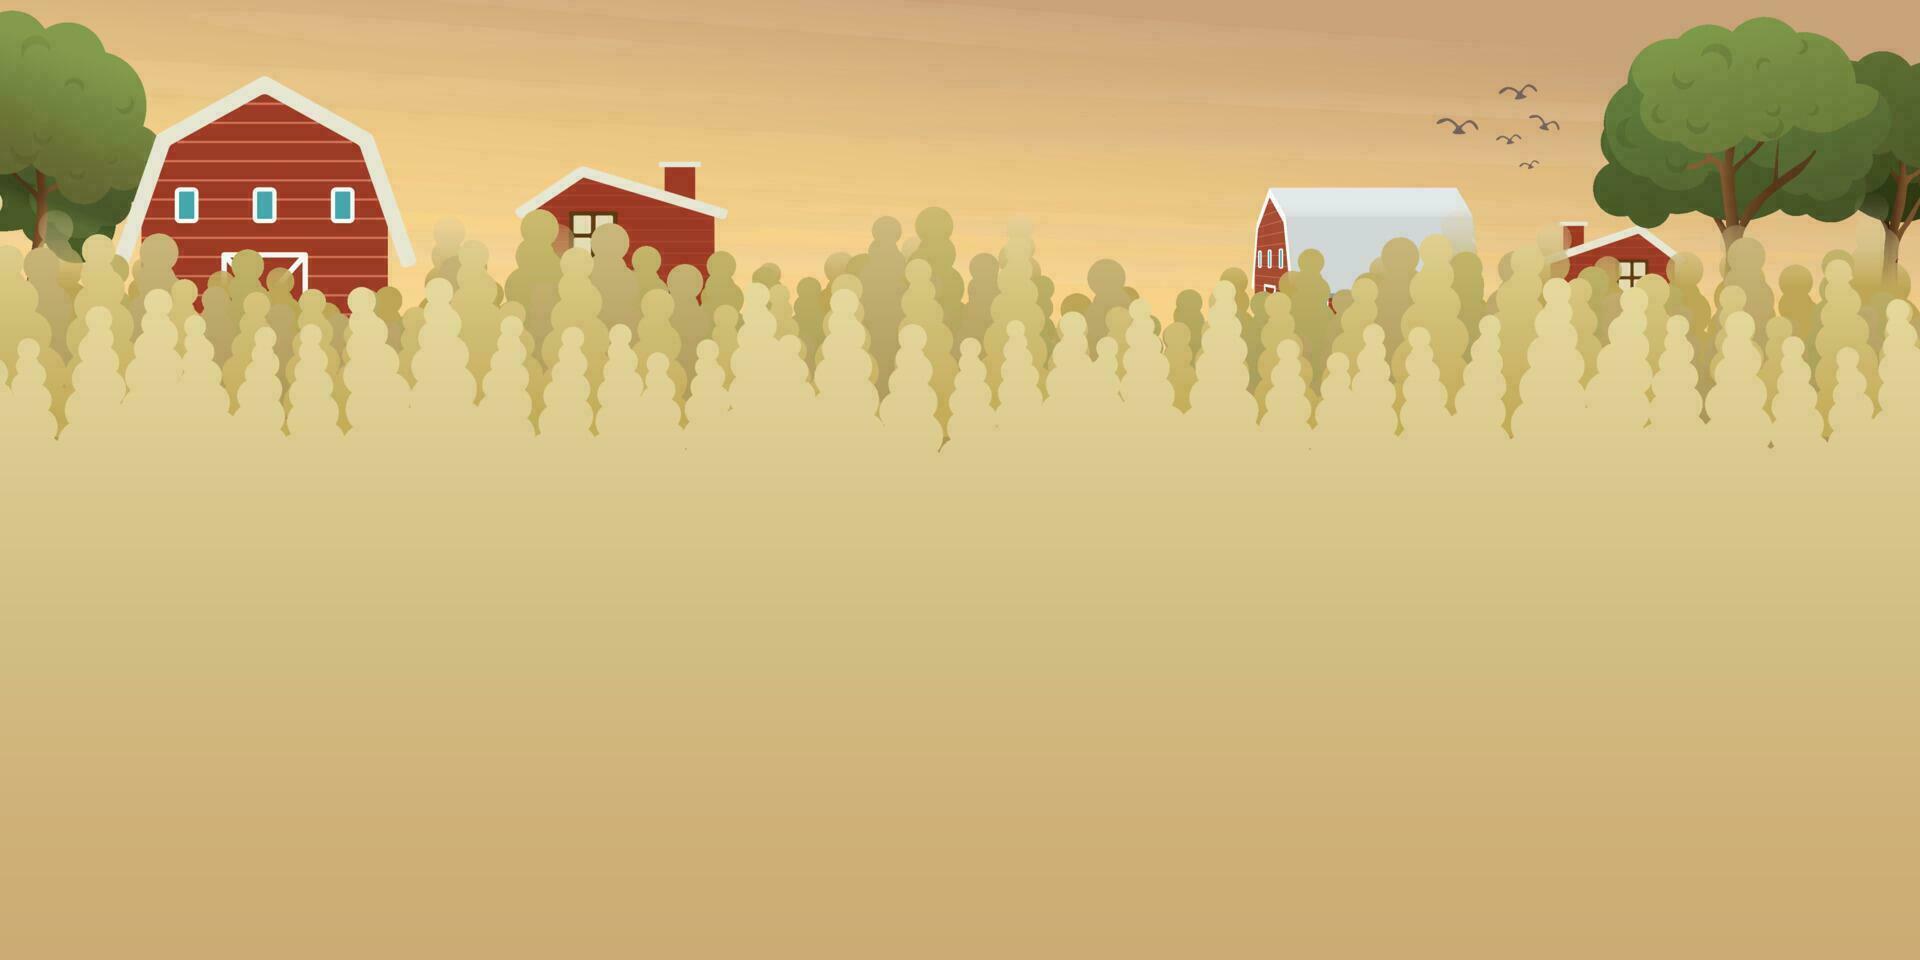 Sunset at rural farm and village landscape vector illustration with blank space. Wheat field flat design for eco or daily products advertisement.